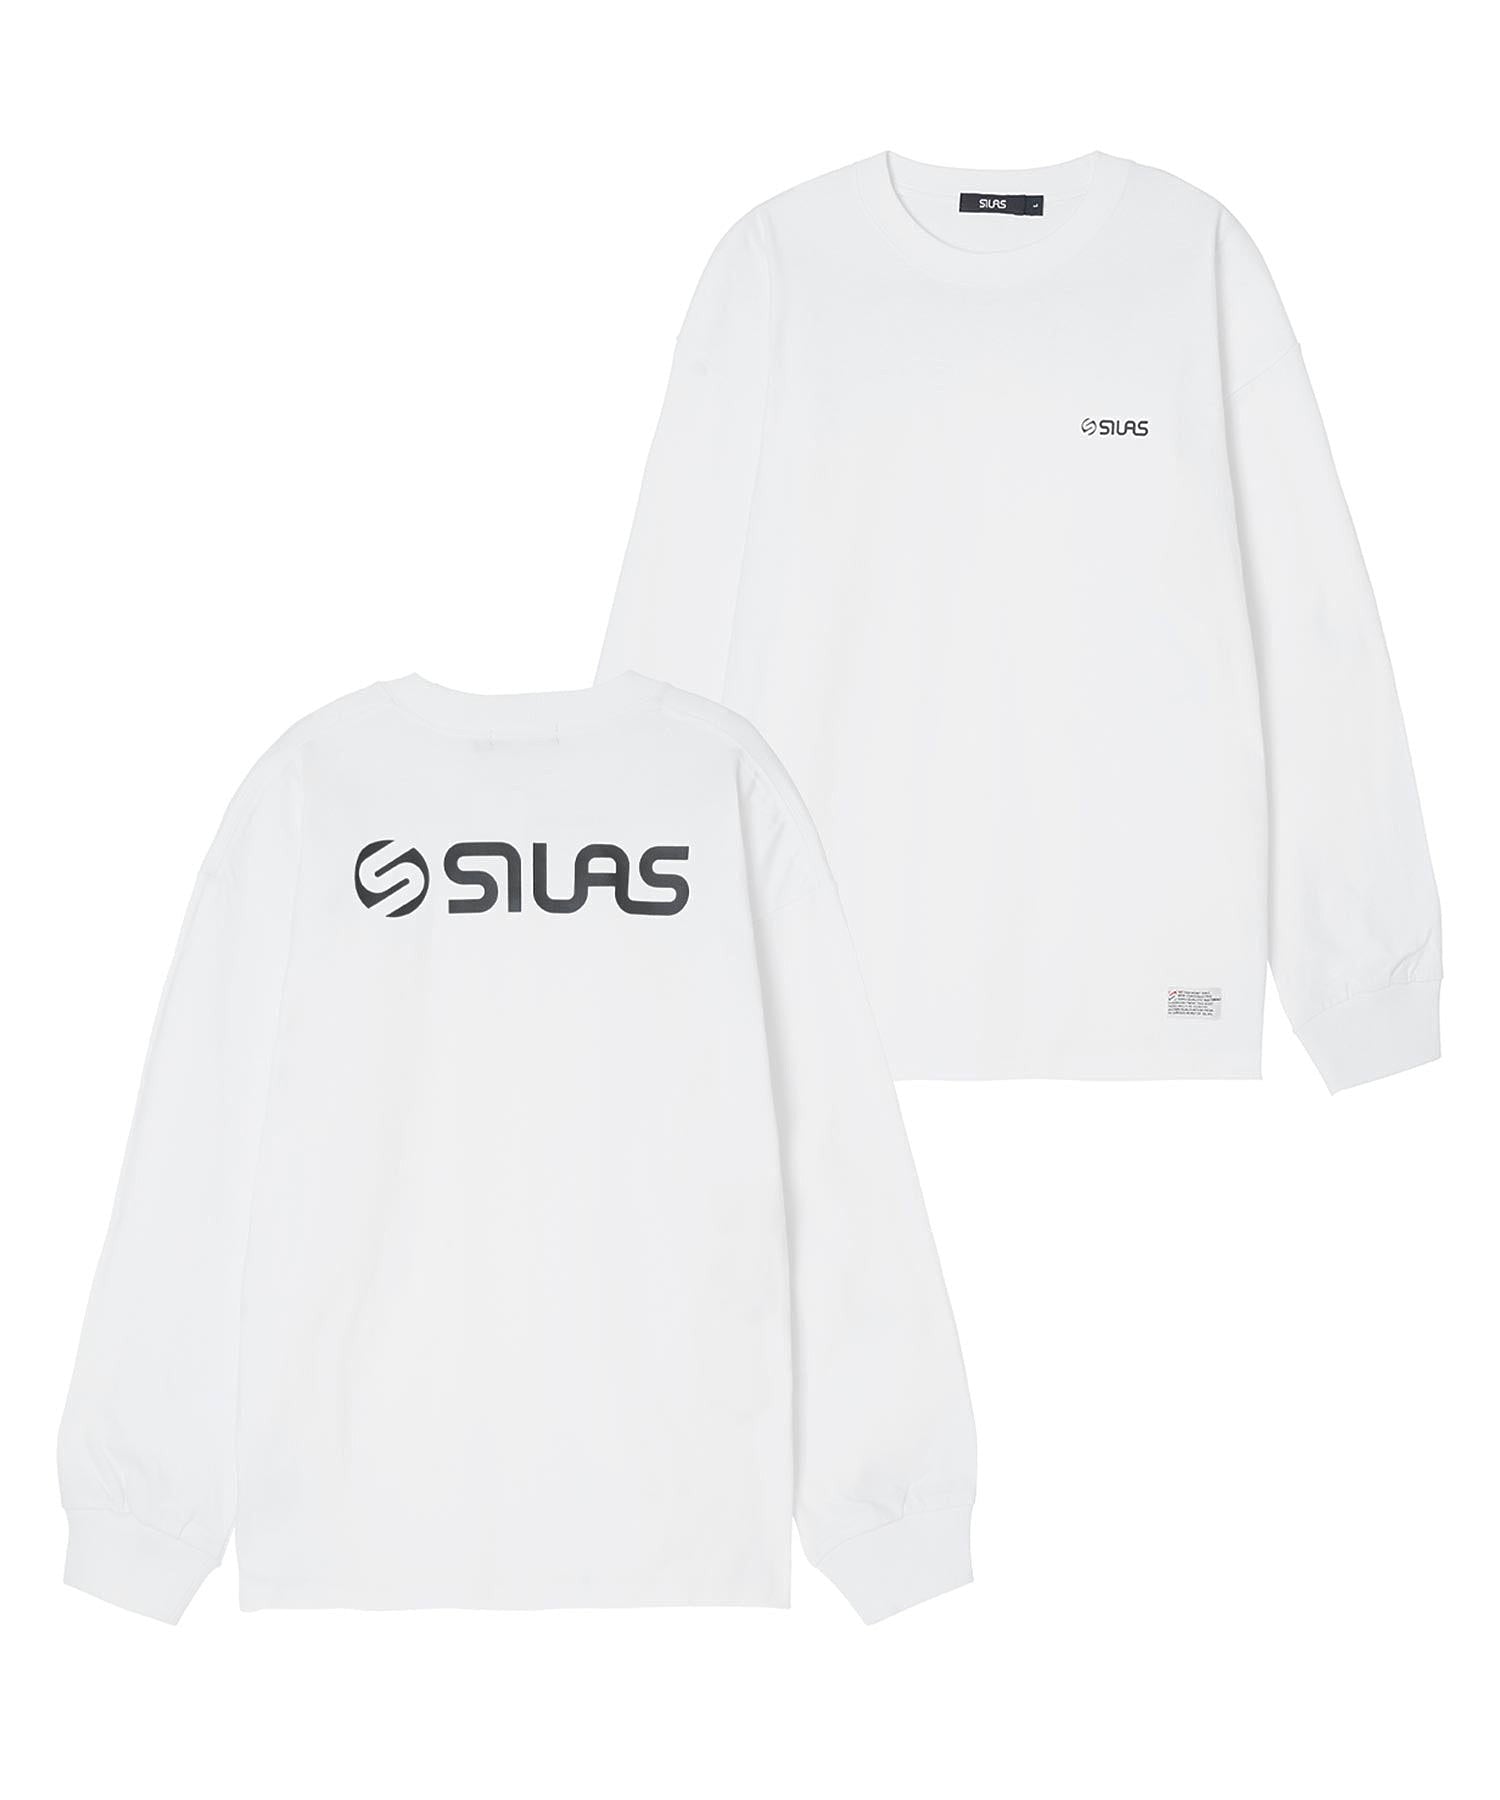 BASIC OLD LOGO L/S TEE SILAS